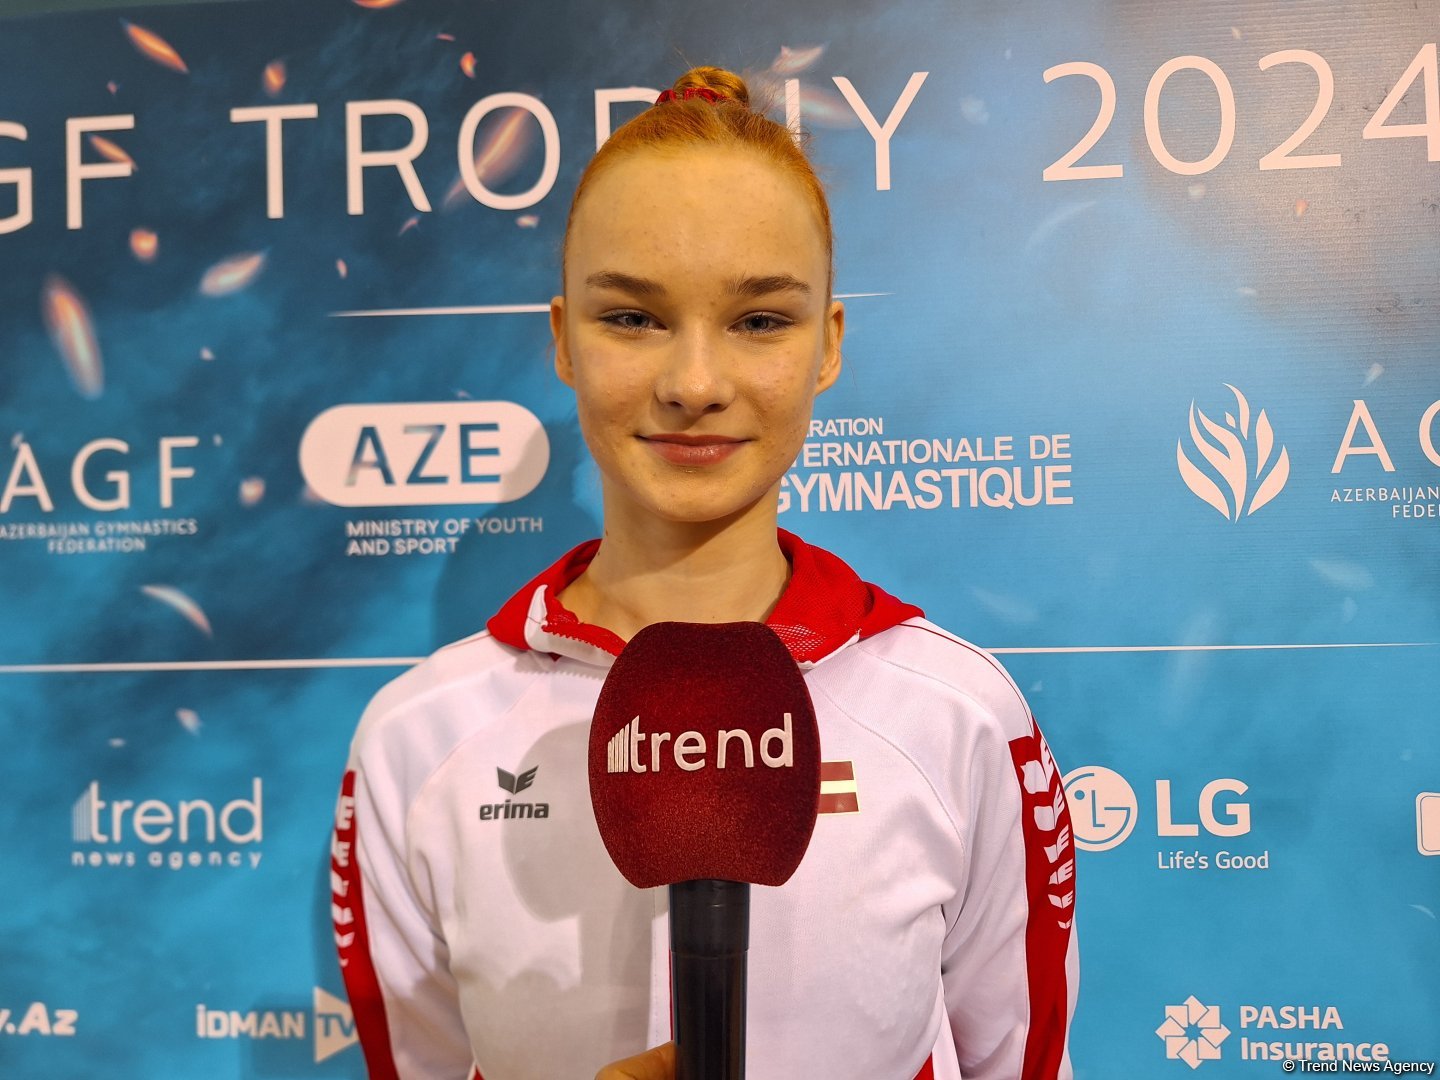 Azerbaijani gymnast holds all chances to qualify for Olympic Games - Latvian athlete